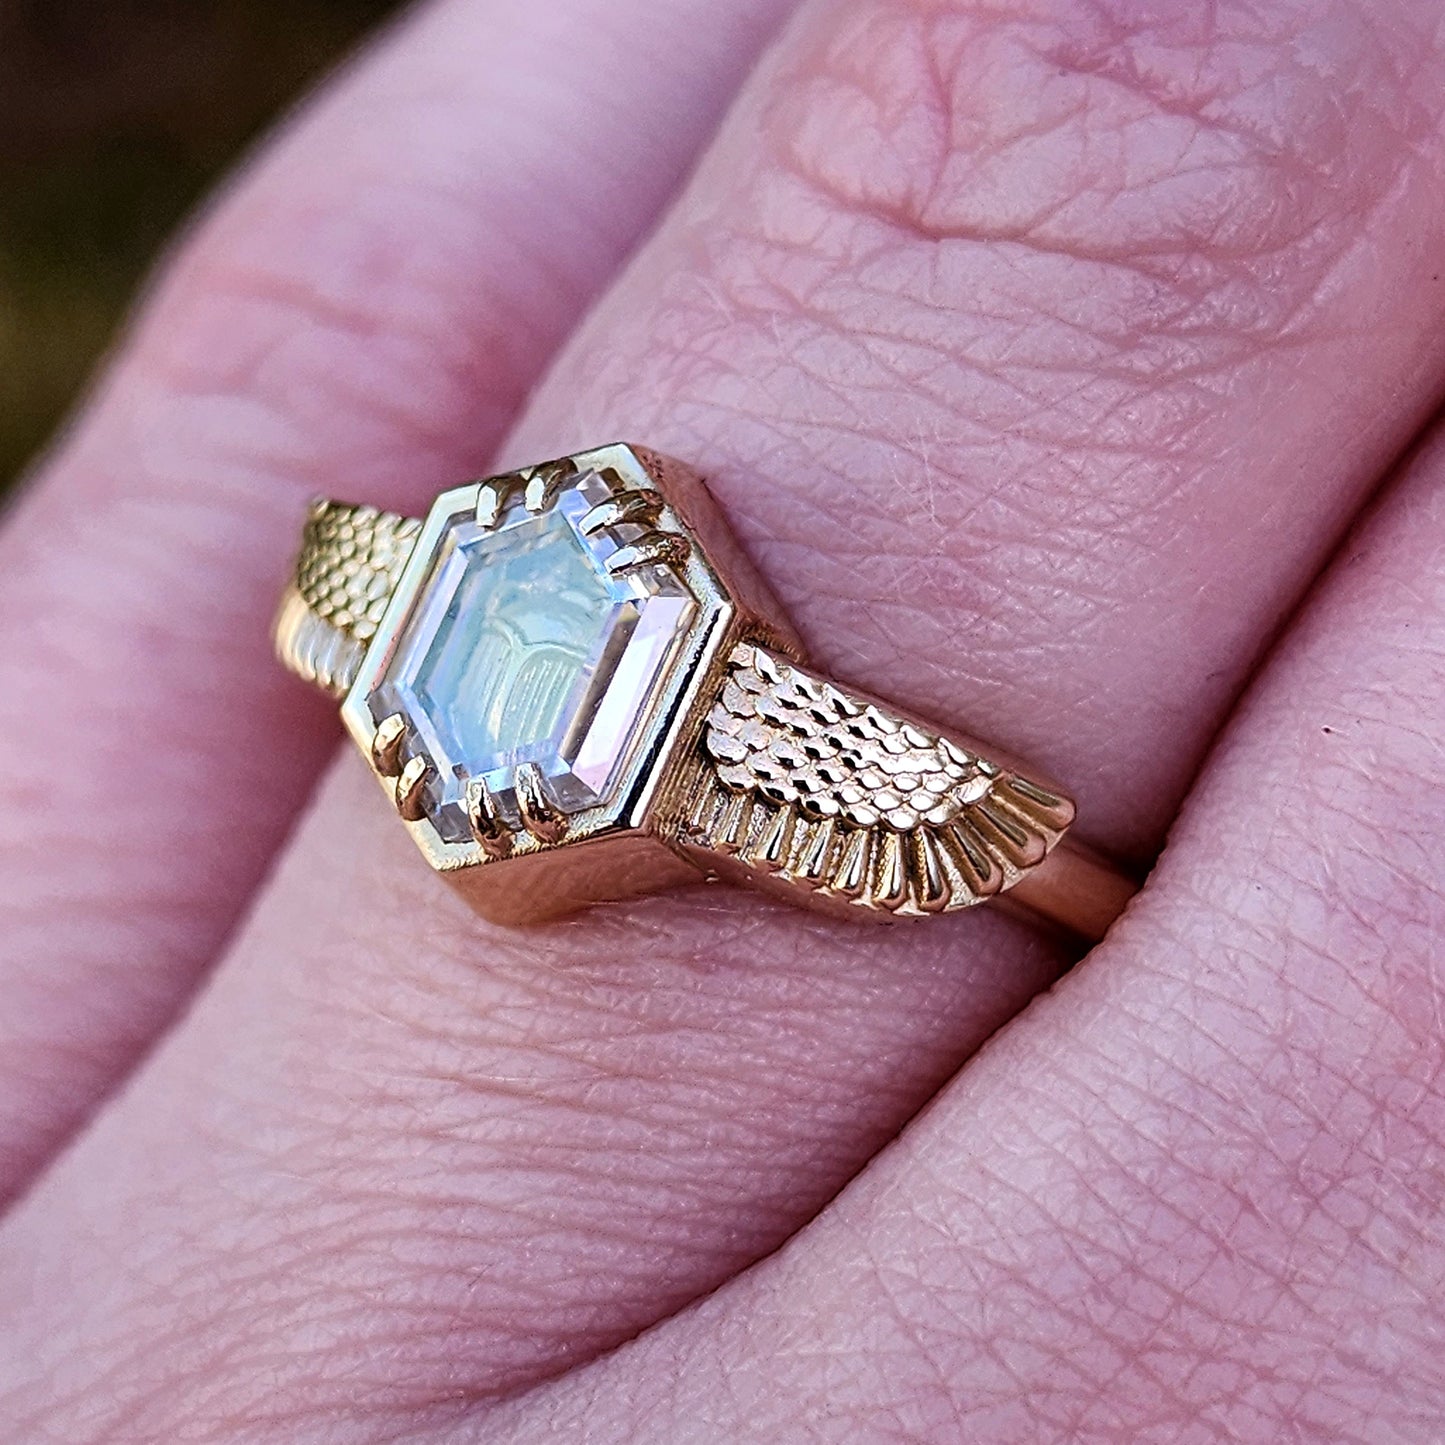 Ready to Ship Size 6 - 8 - Sun Scarab Wing Beetle Ring with Moissanite Window Pane - 14k Yellow Gold Egyptian Revival Ring